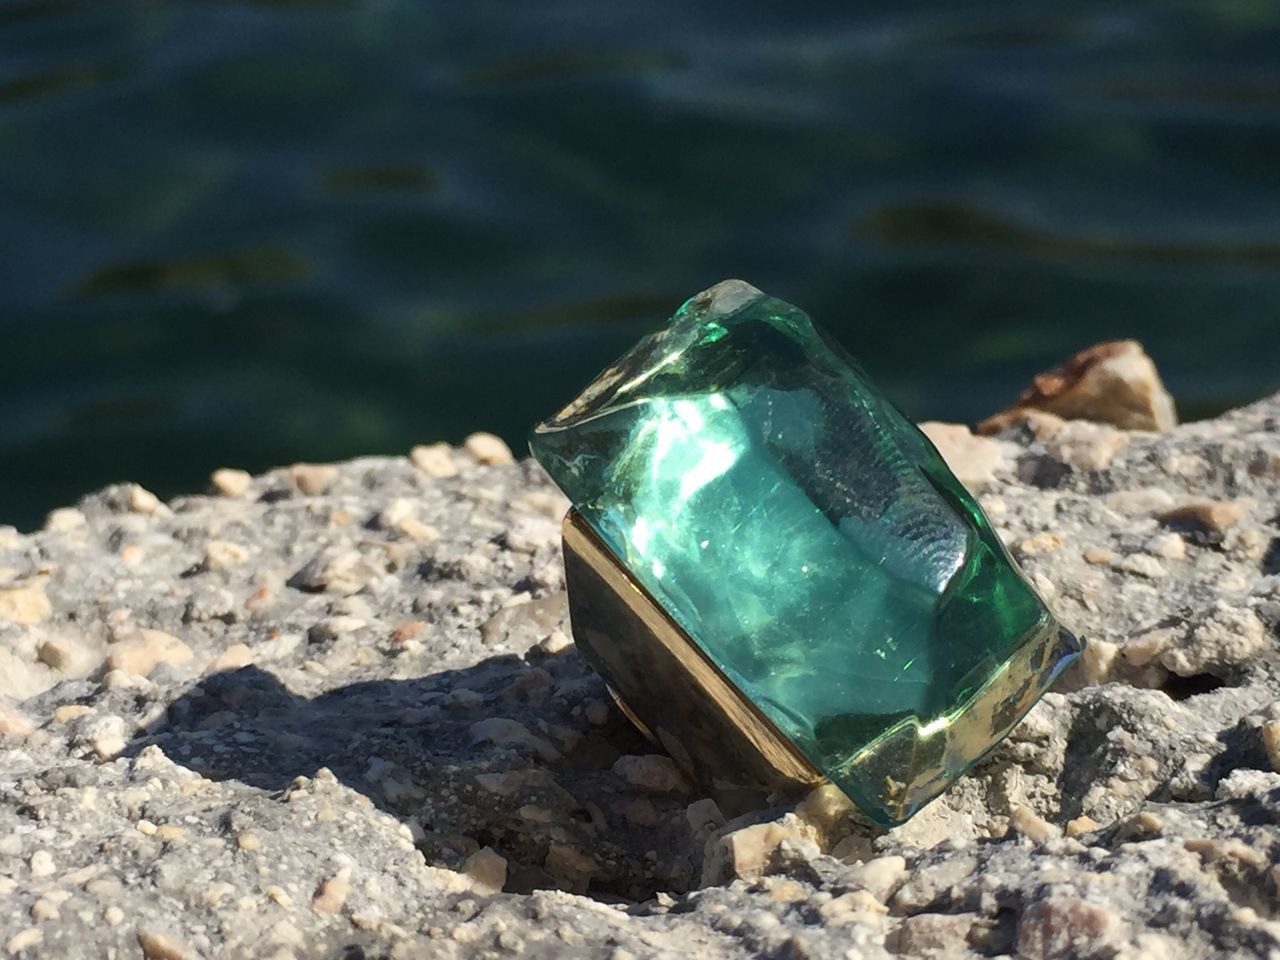 solid, water, rock, nature, sunlight, rock - object, day, green color, close-up, focus on foreground, glass - material, no people, transparent, container, stone - object, bottle, outdoors, single object, gemstone, precious gem, pollution, turquoise colored